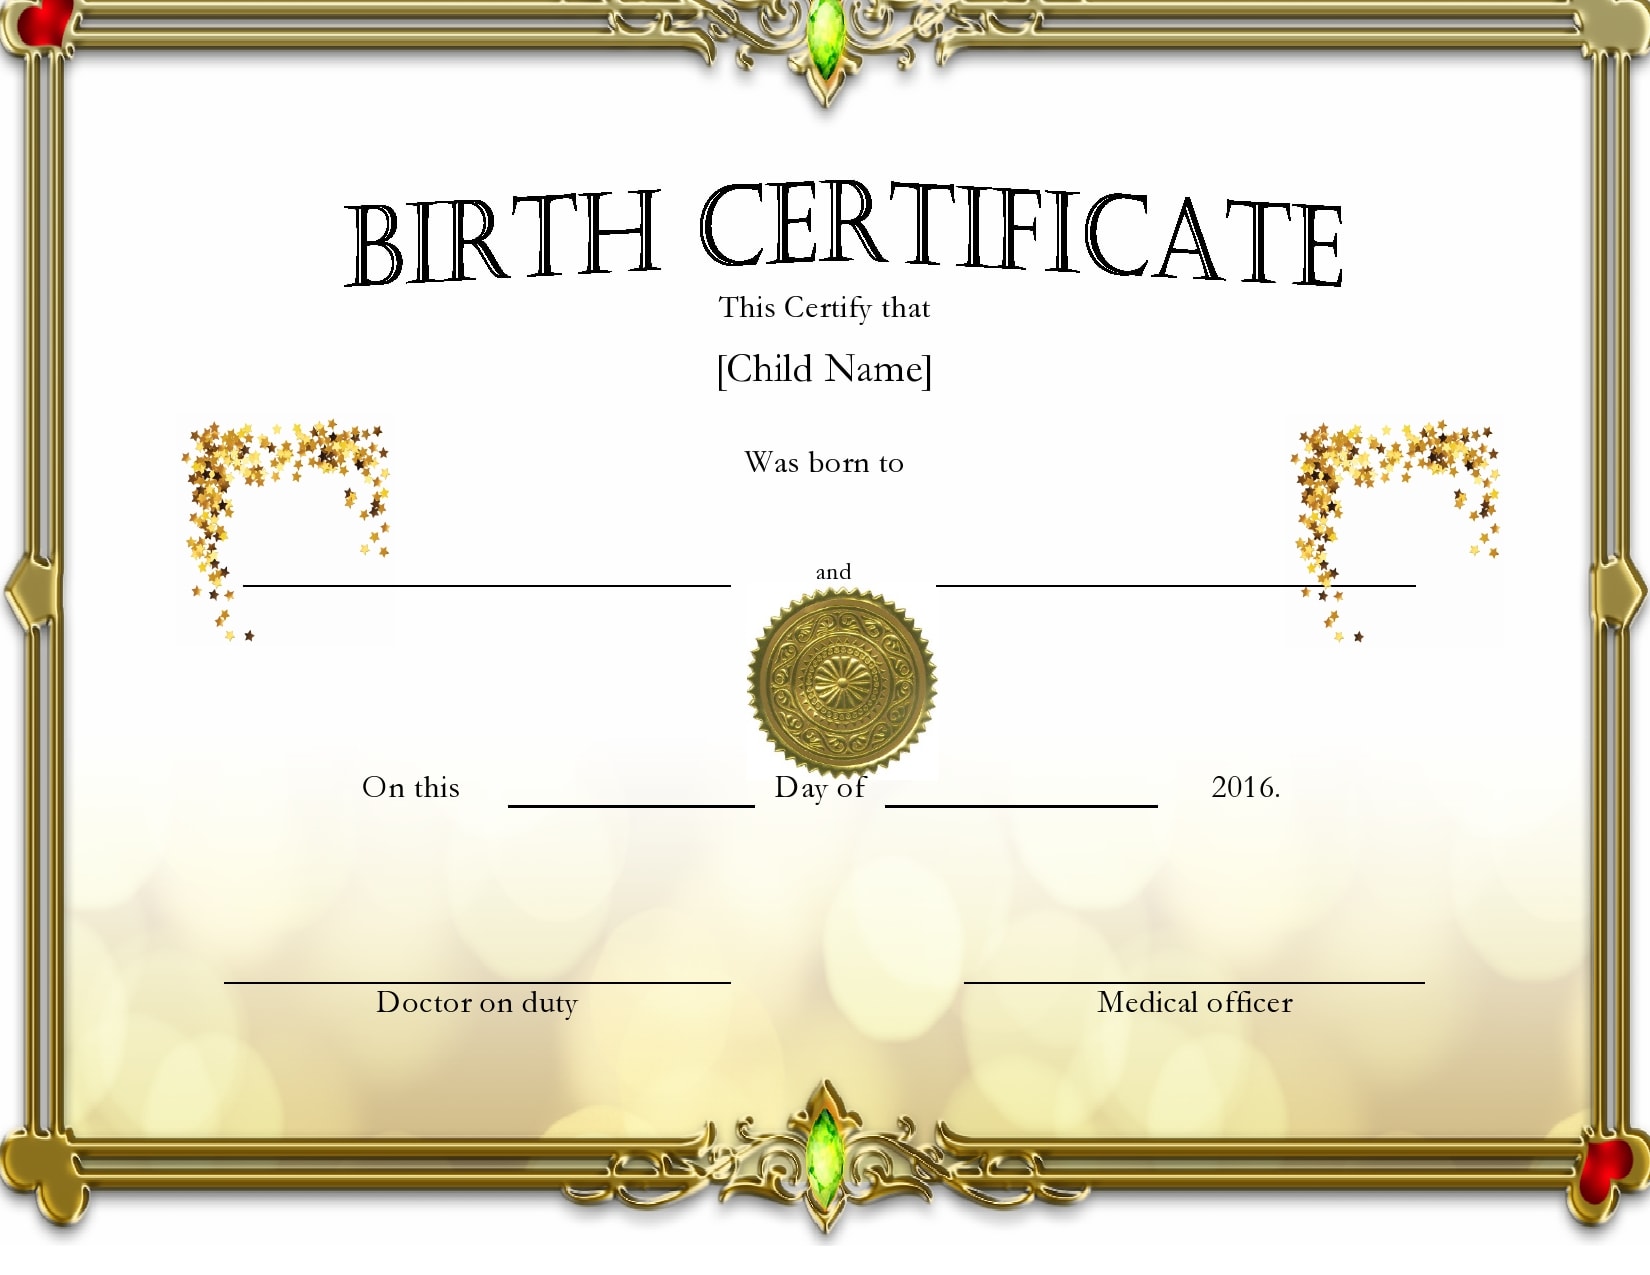 22 Blank Birth Certificate Templates (& Examples) - PrintableTemplates Pertaining To Novelty Birth Certificate Template